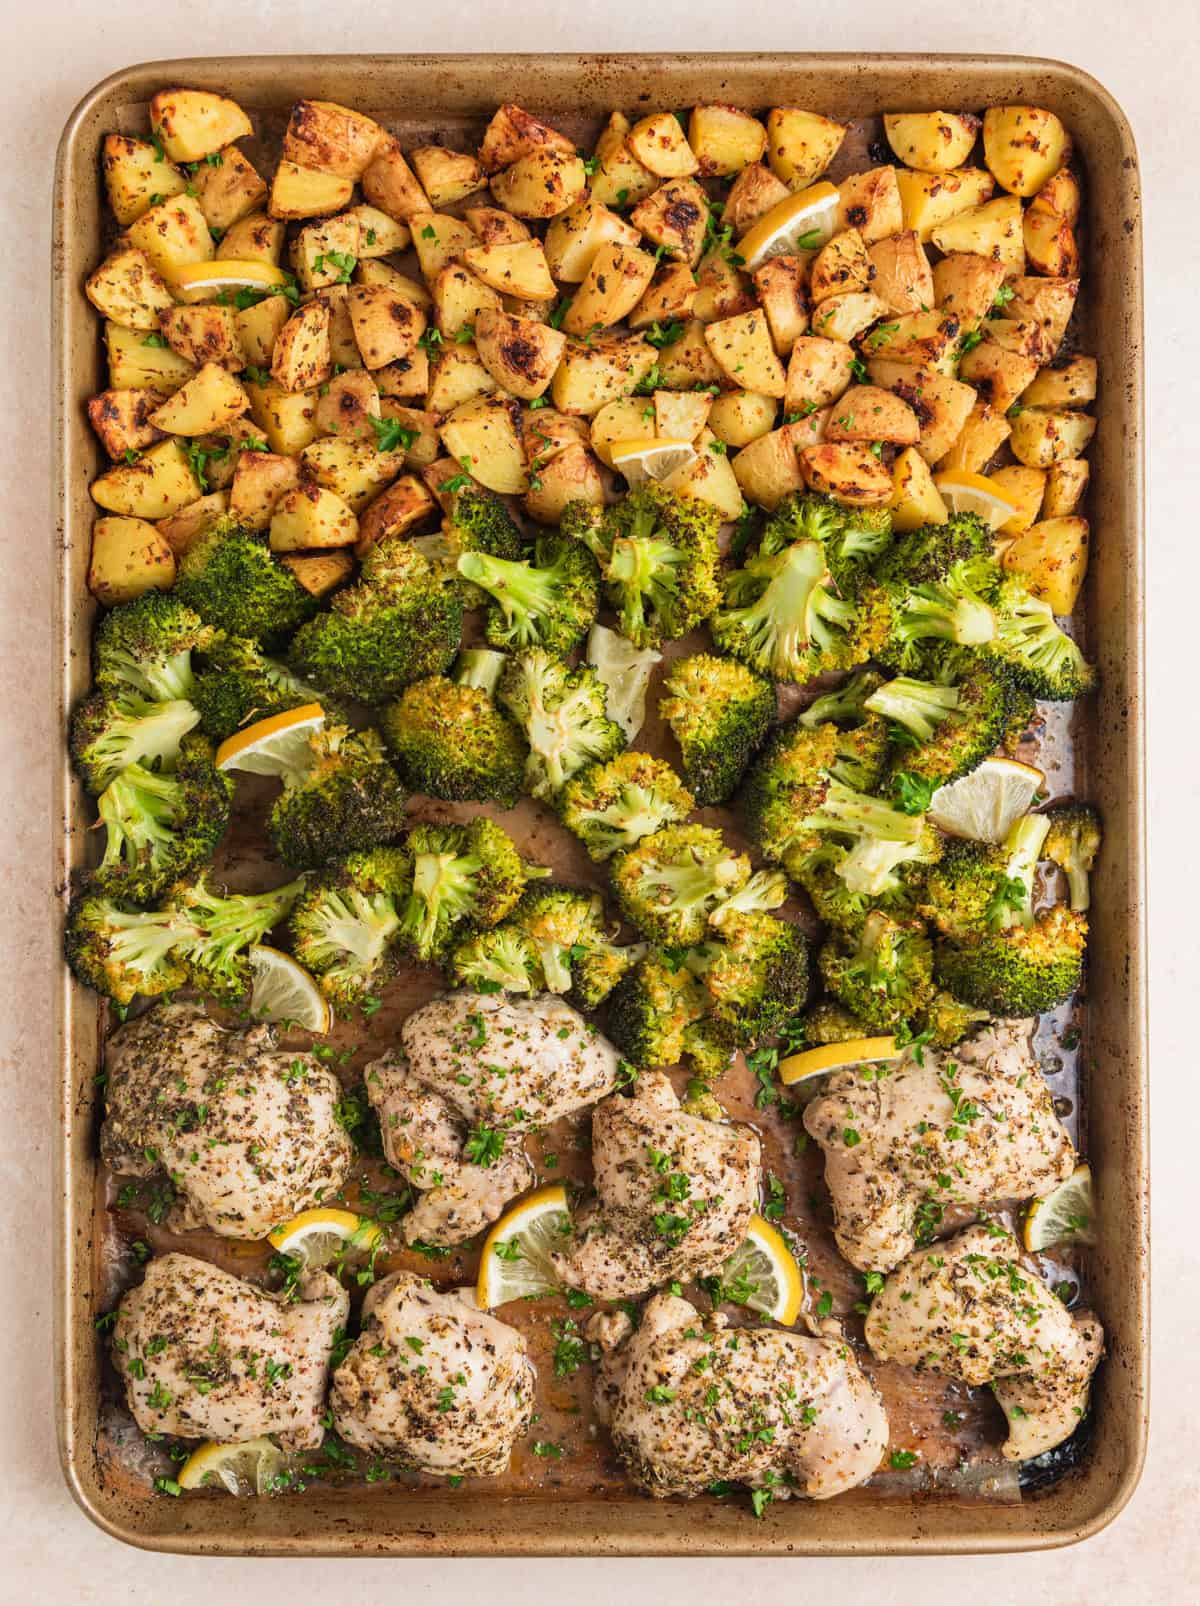 Sheet pan chicken and broccoli with potatoes arranged on baking sheet.